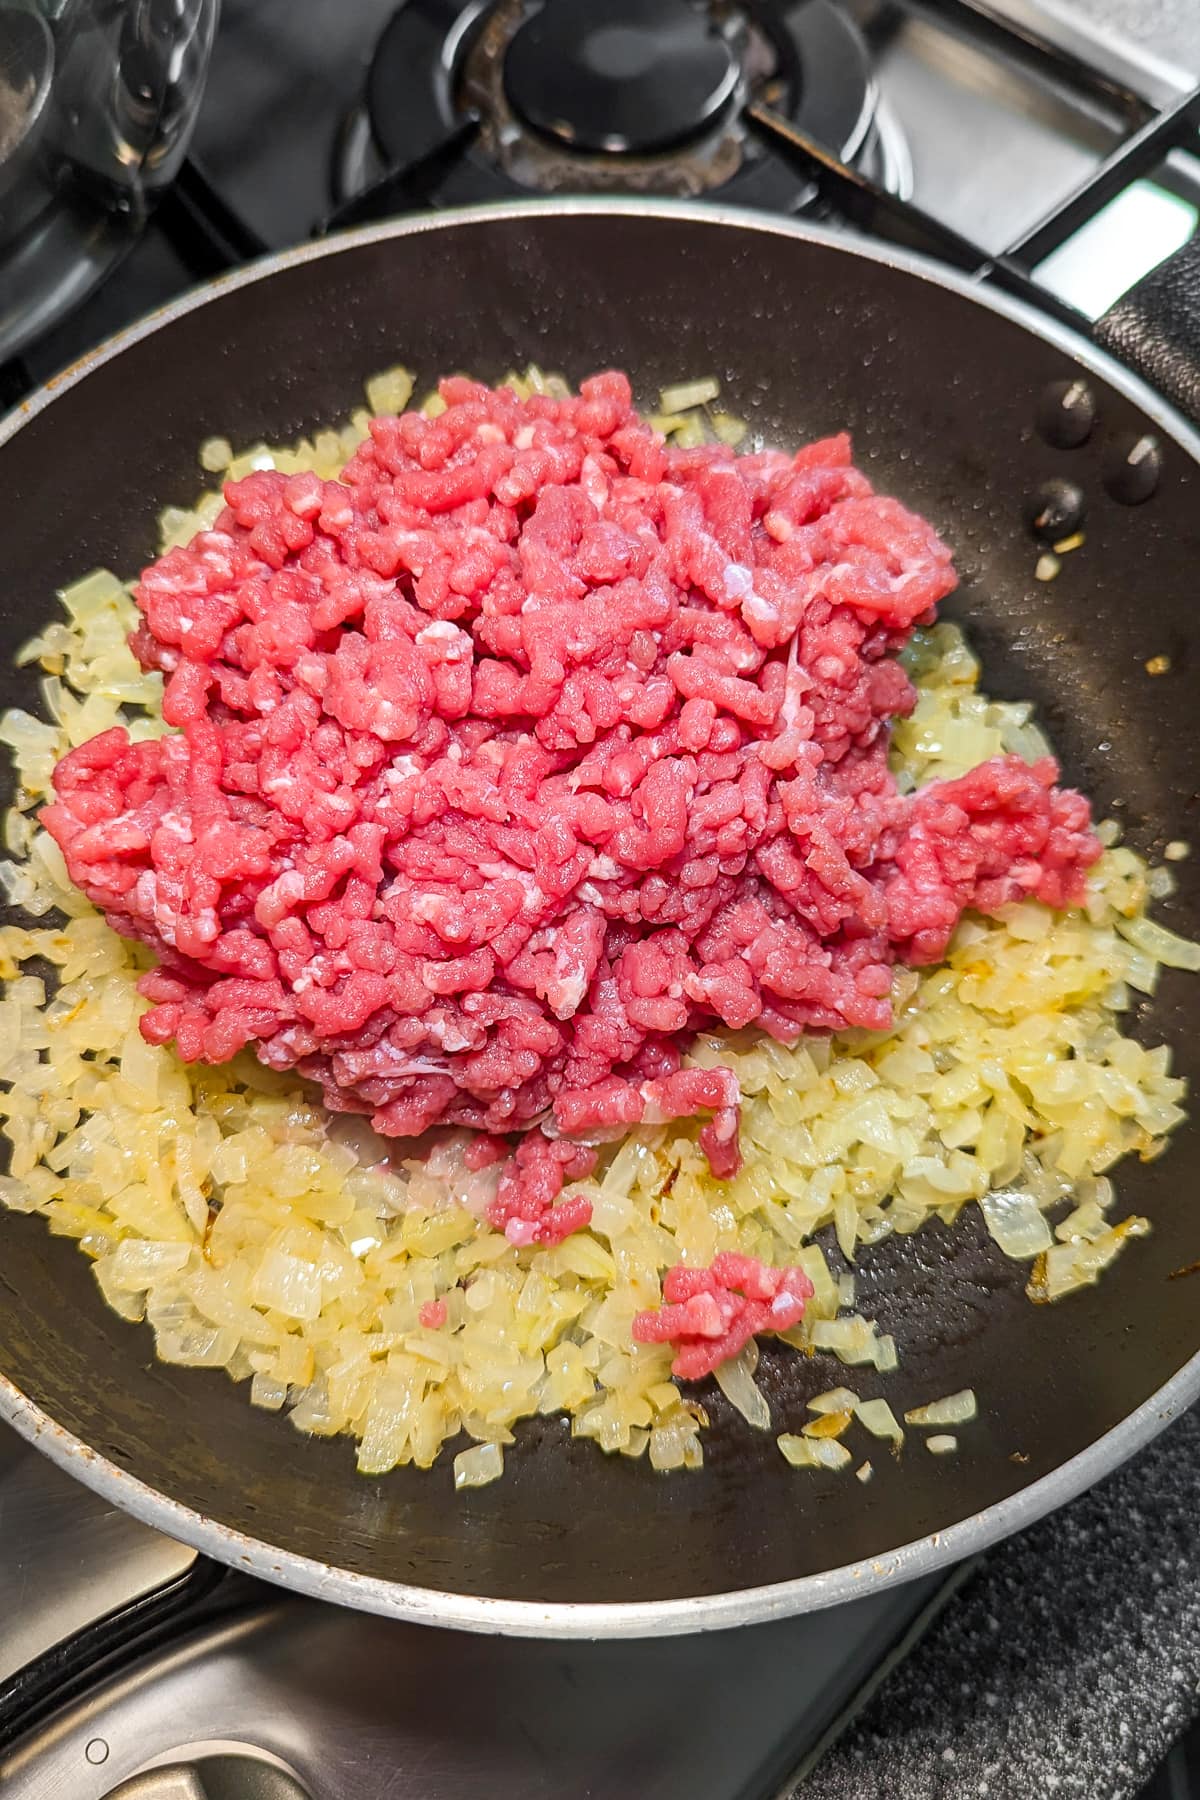 Raw minced meat added over caramelized onions in a frying pan on the stove.